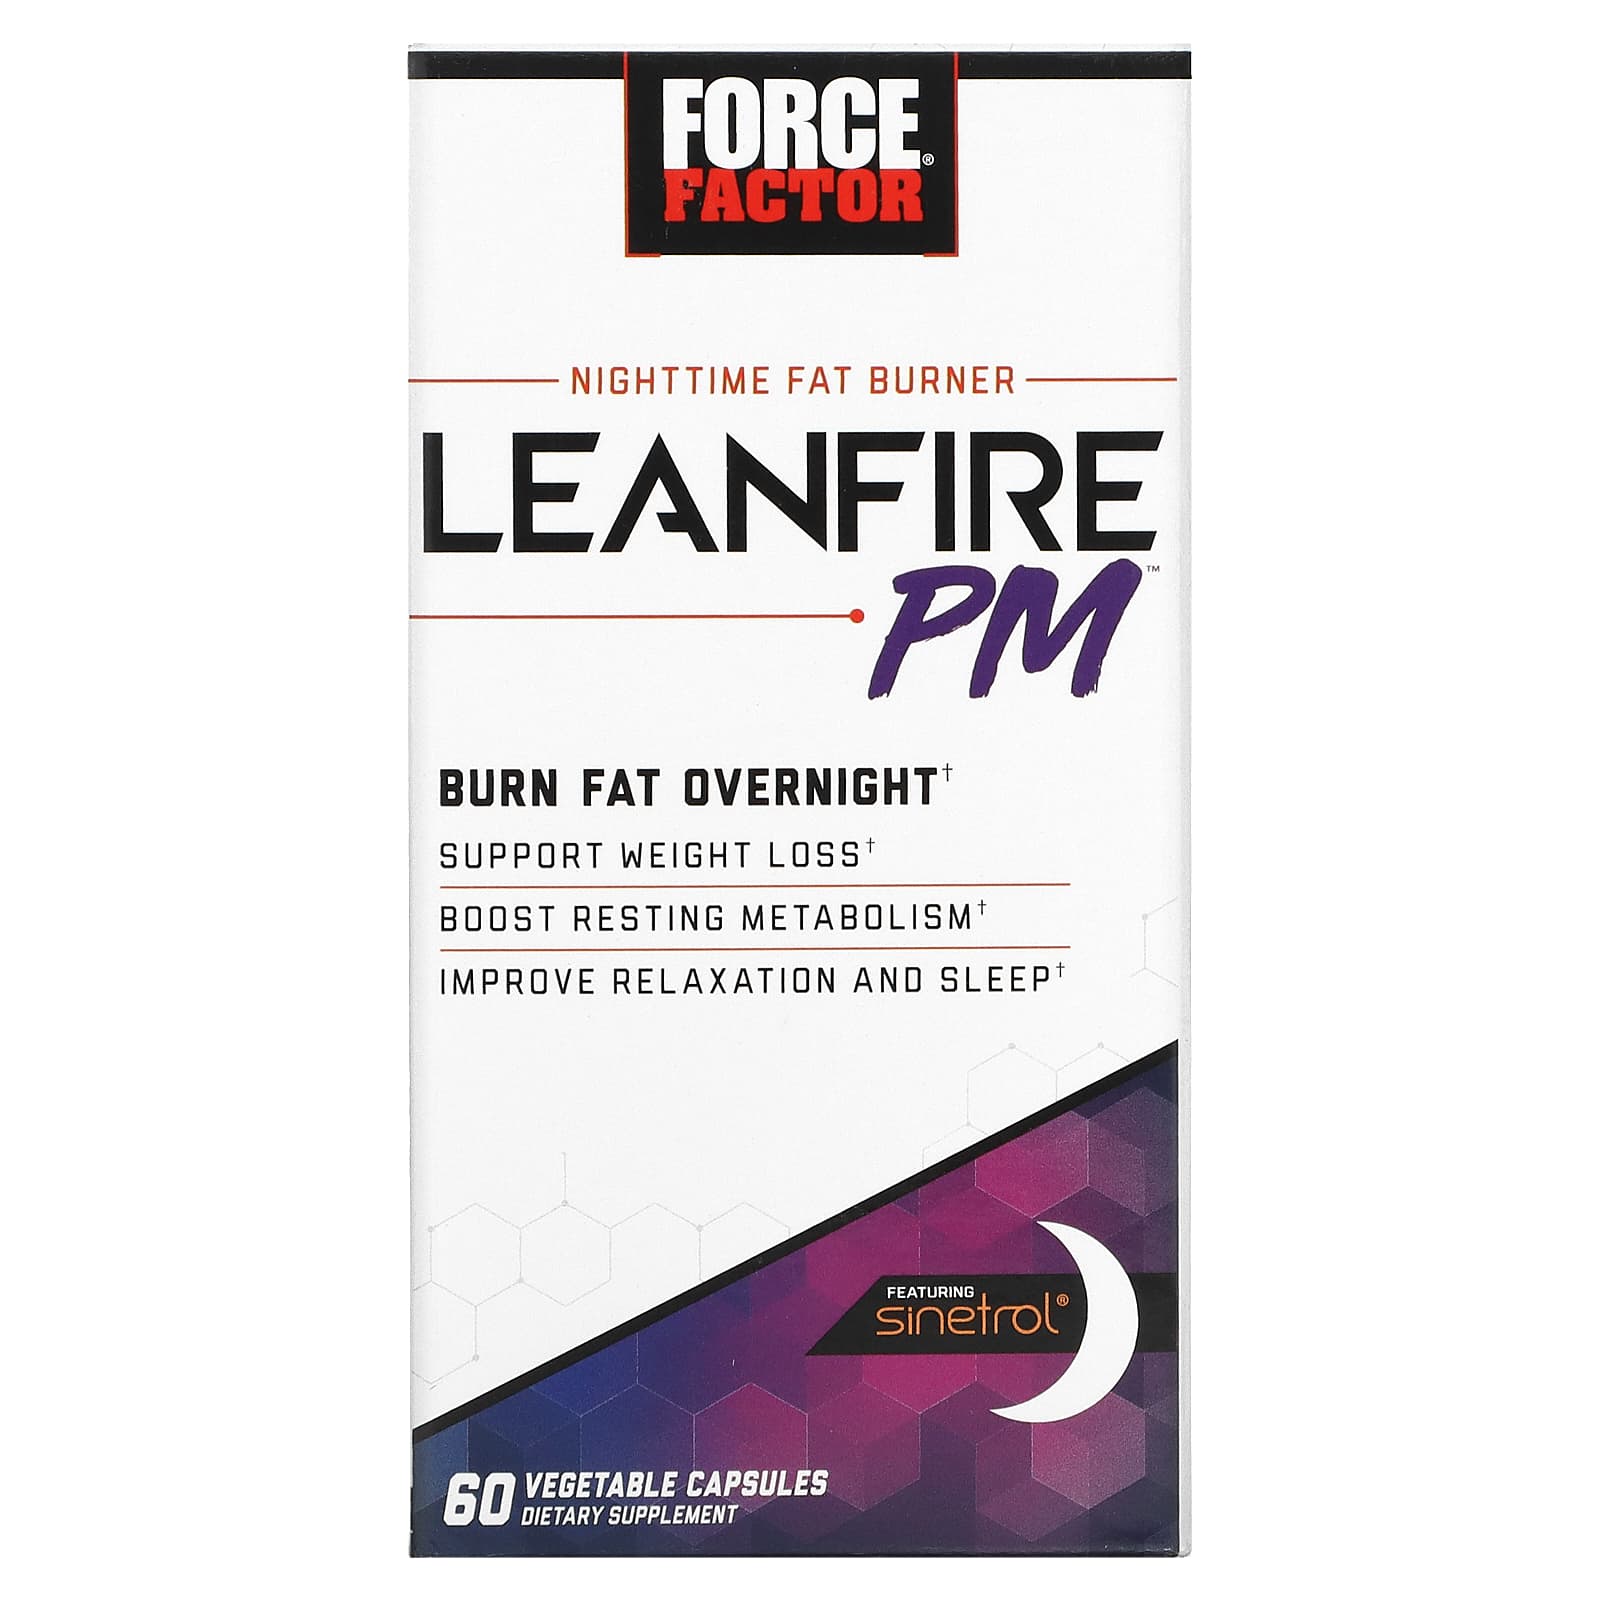 Force Factor Leanfire PM, 60 Vegetable Capsules